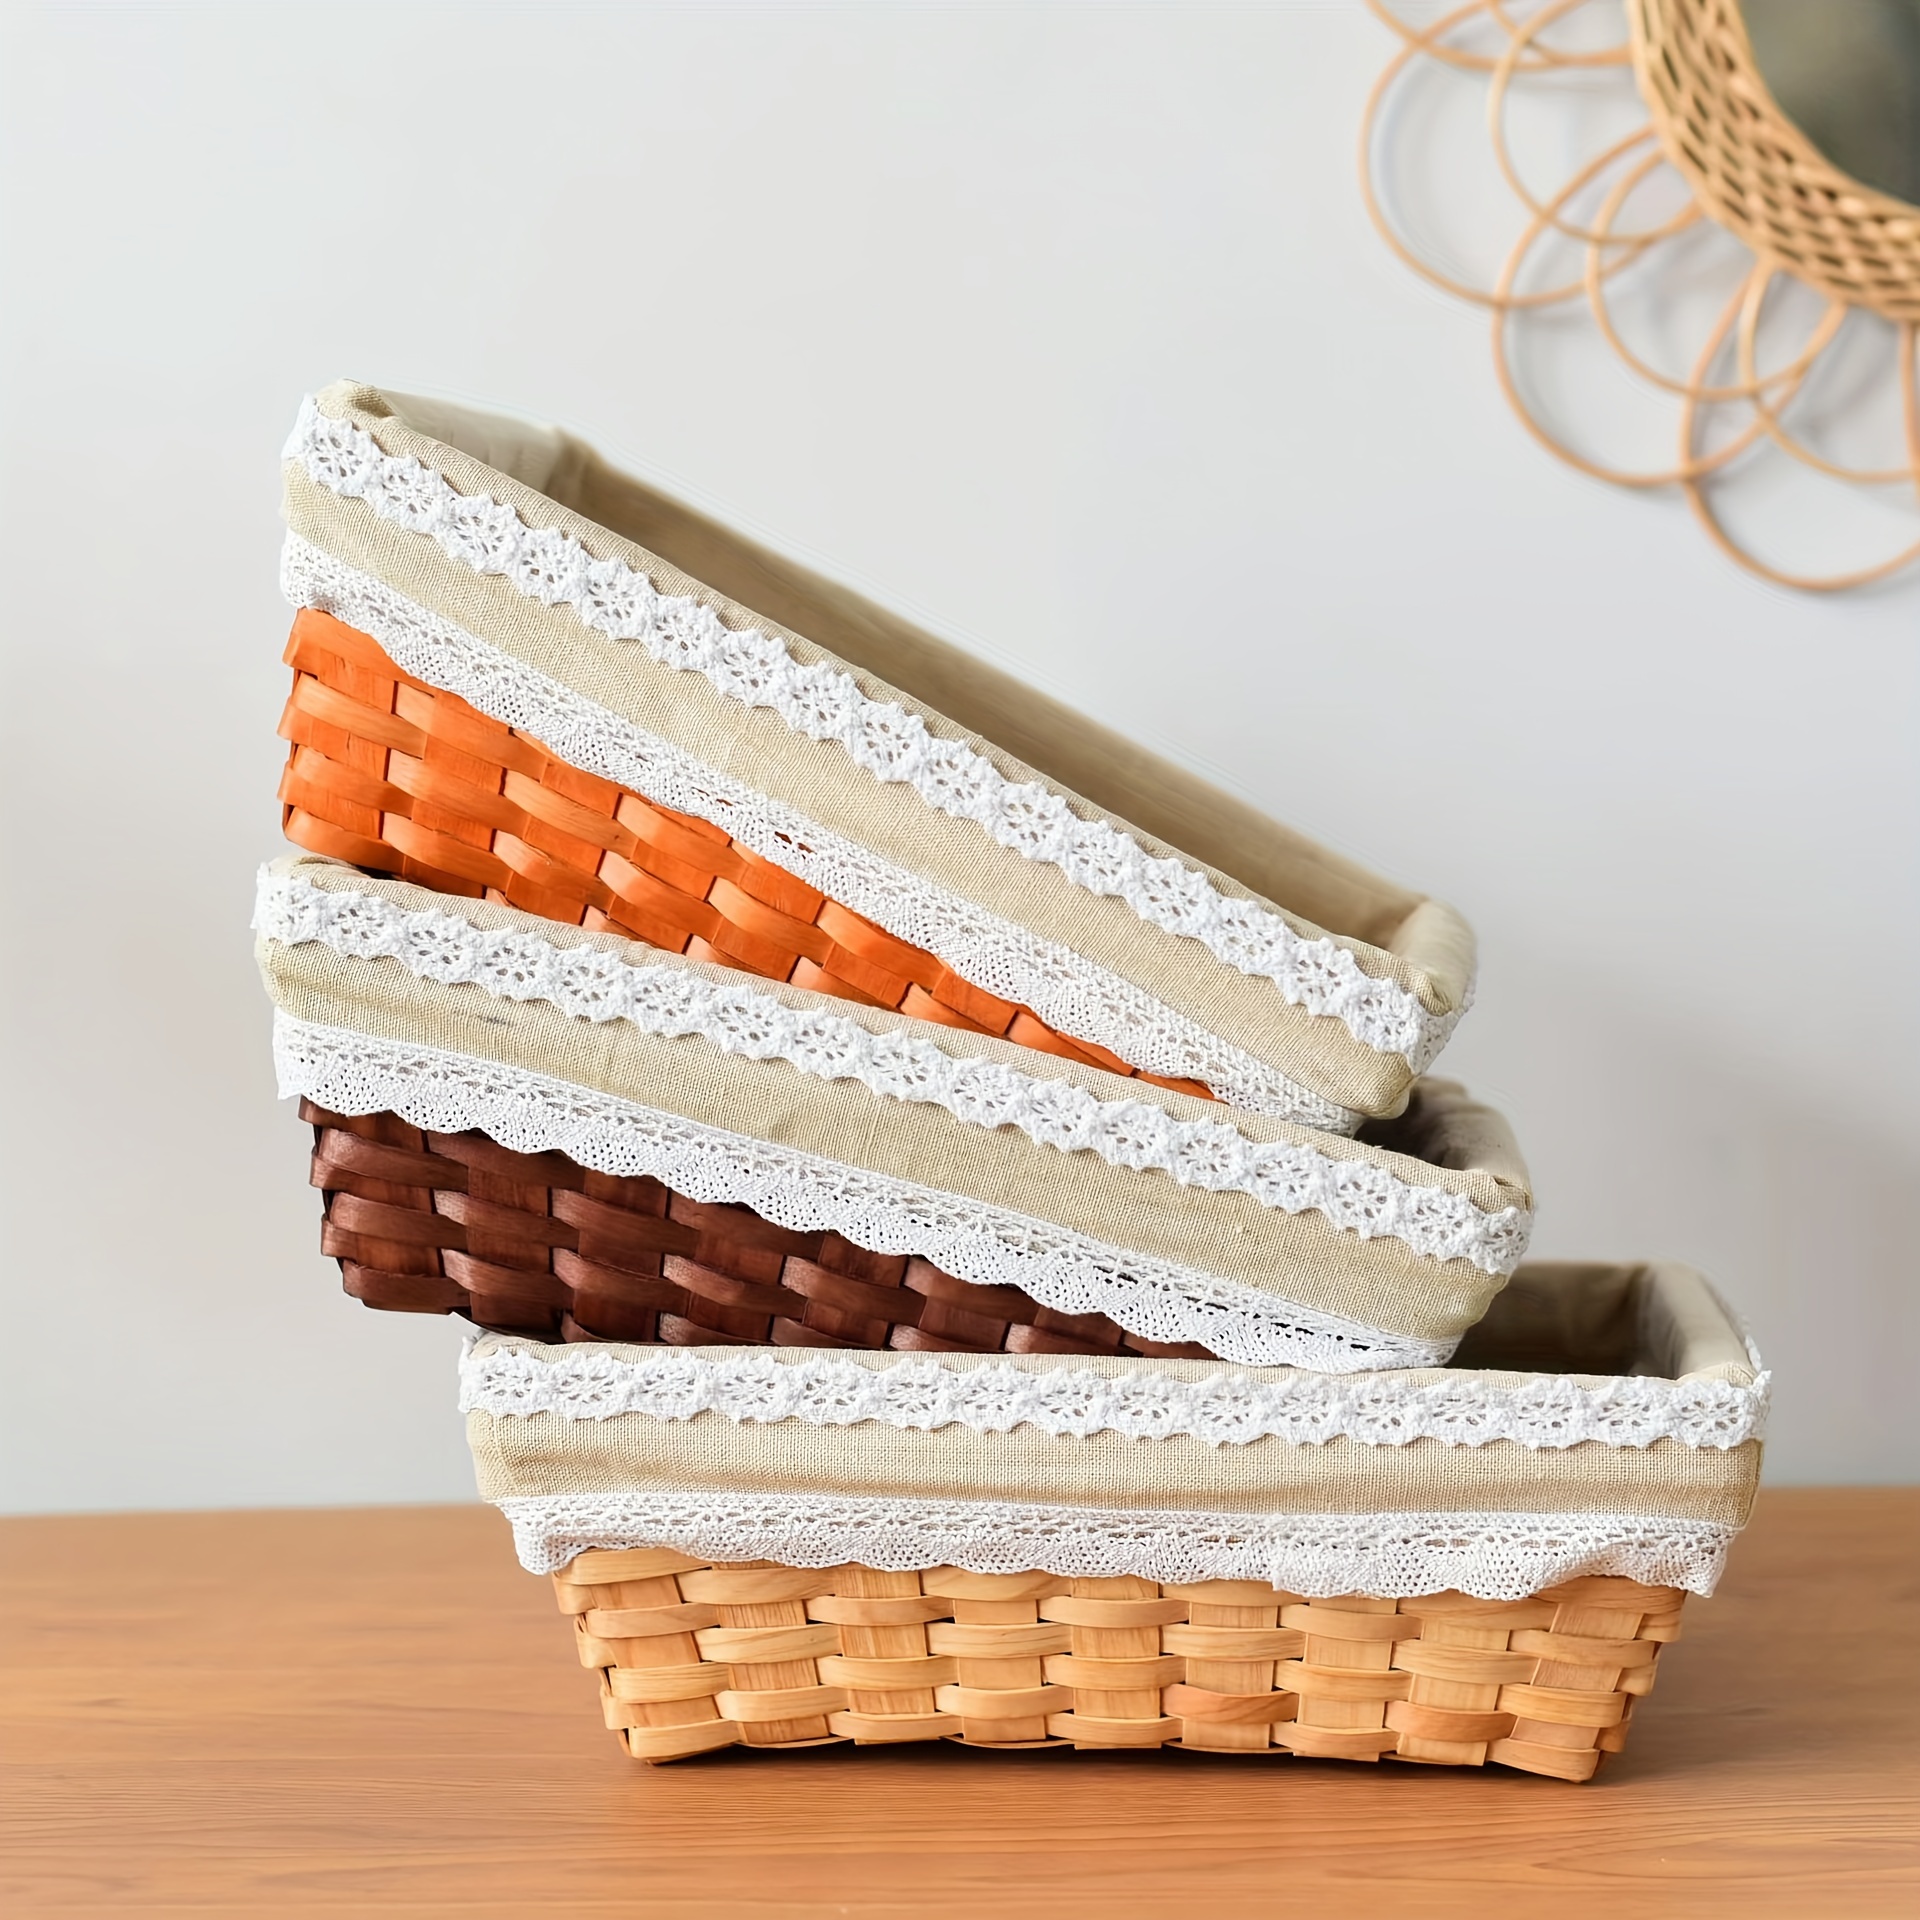 1pc hand woven storage basket rattan desktop organizer willow woven cotton and linen storage basket sundries snack storage finishing storage box home decor christmas gift new year gift gift for man gift for woman